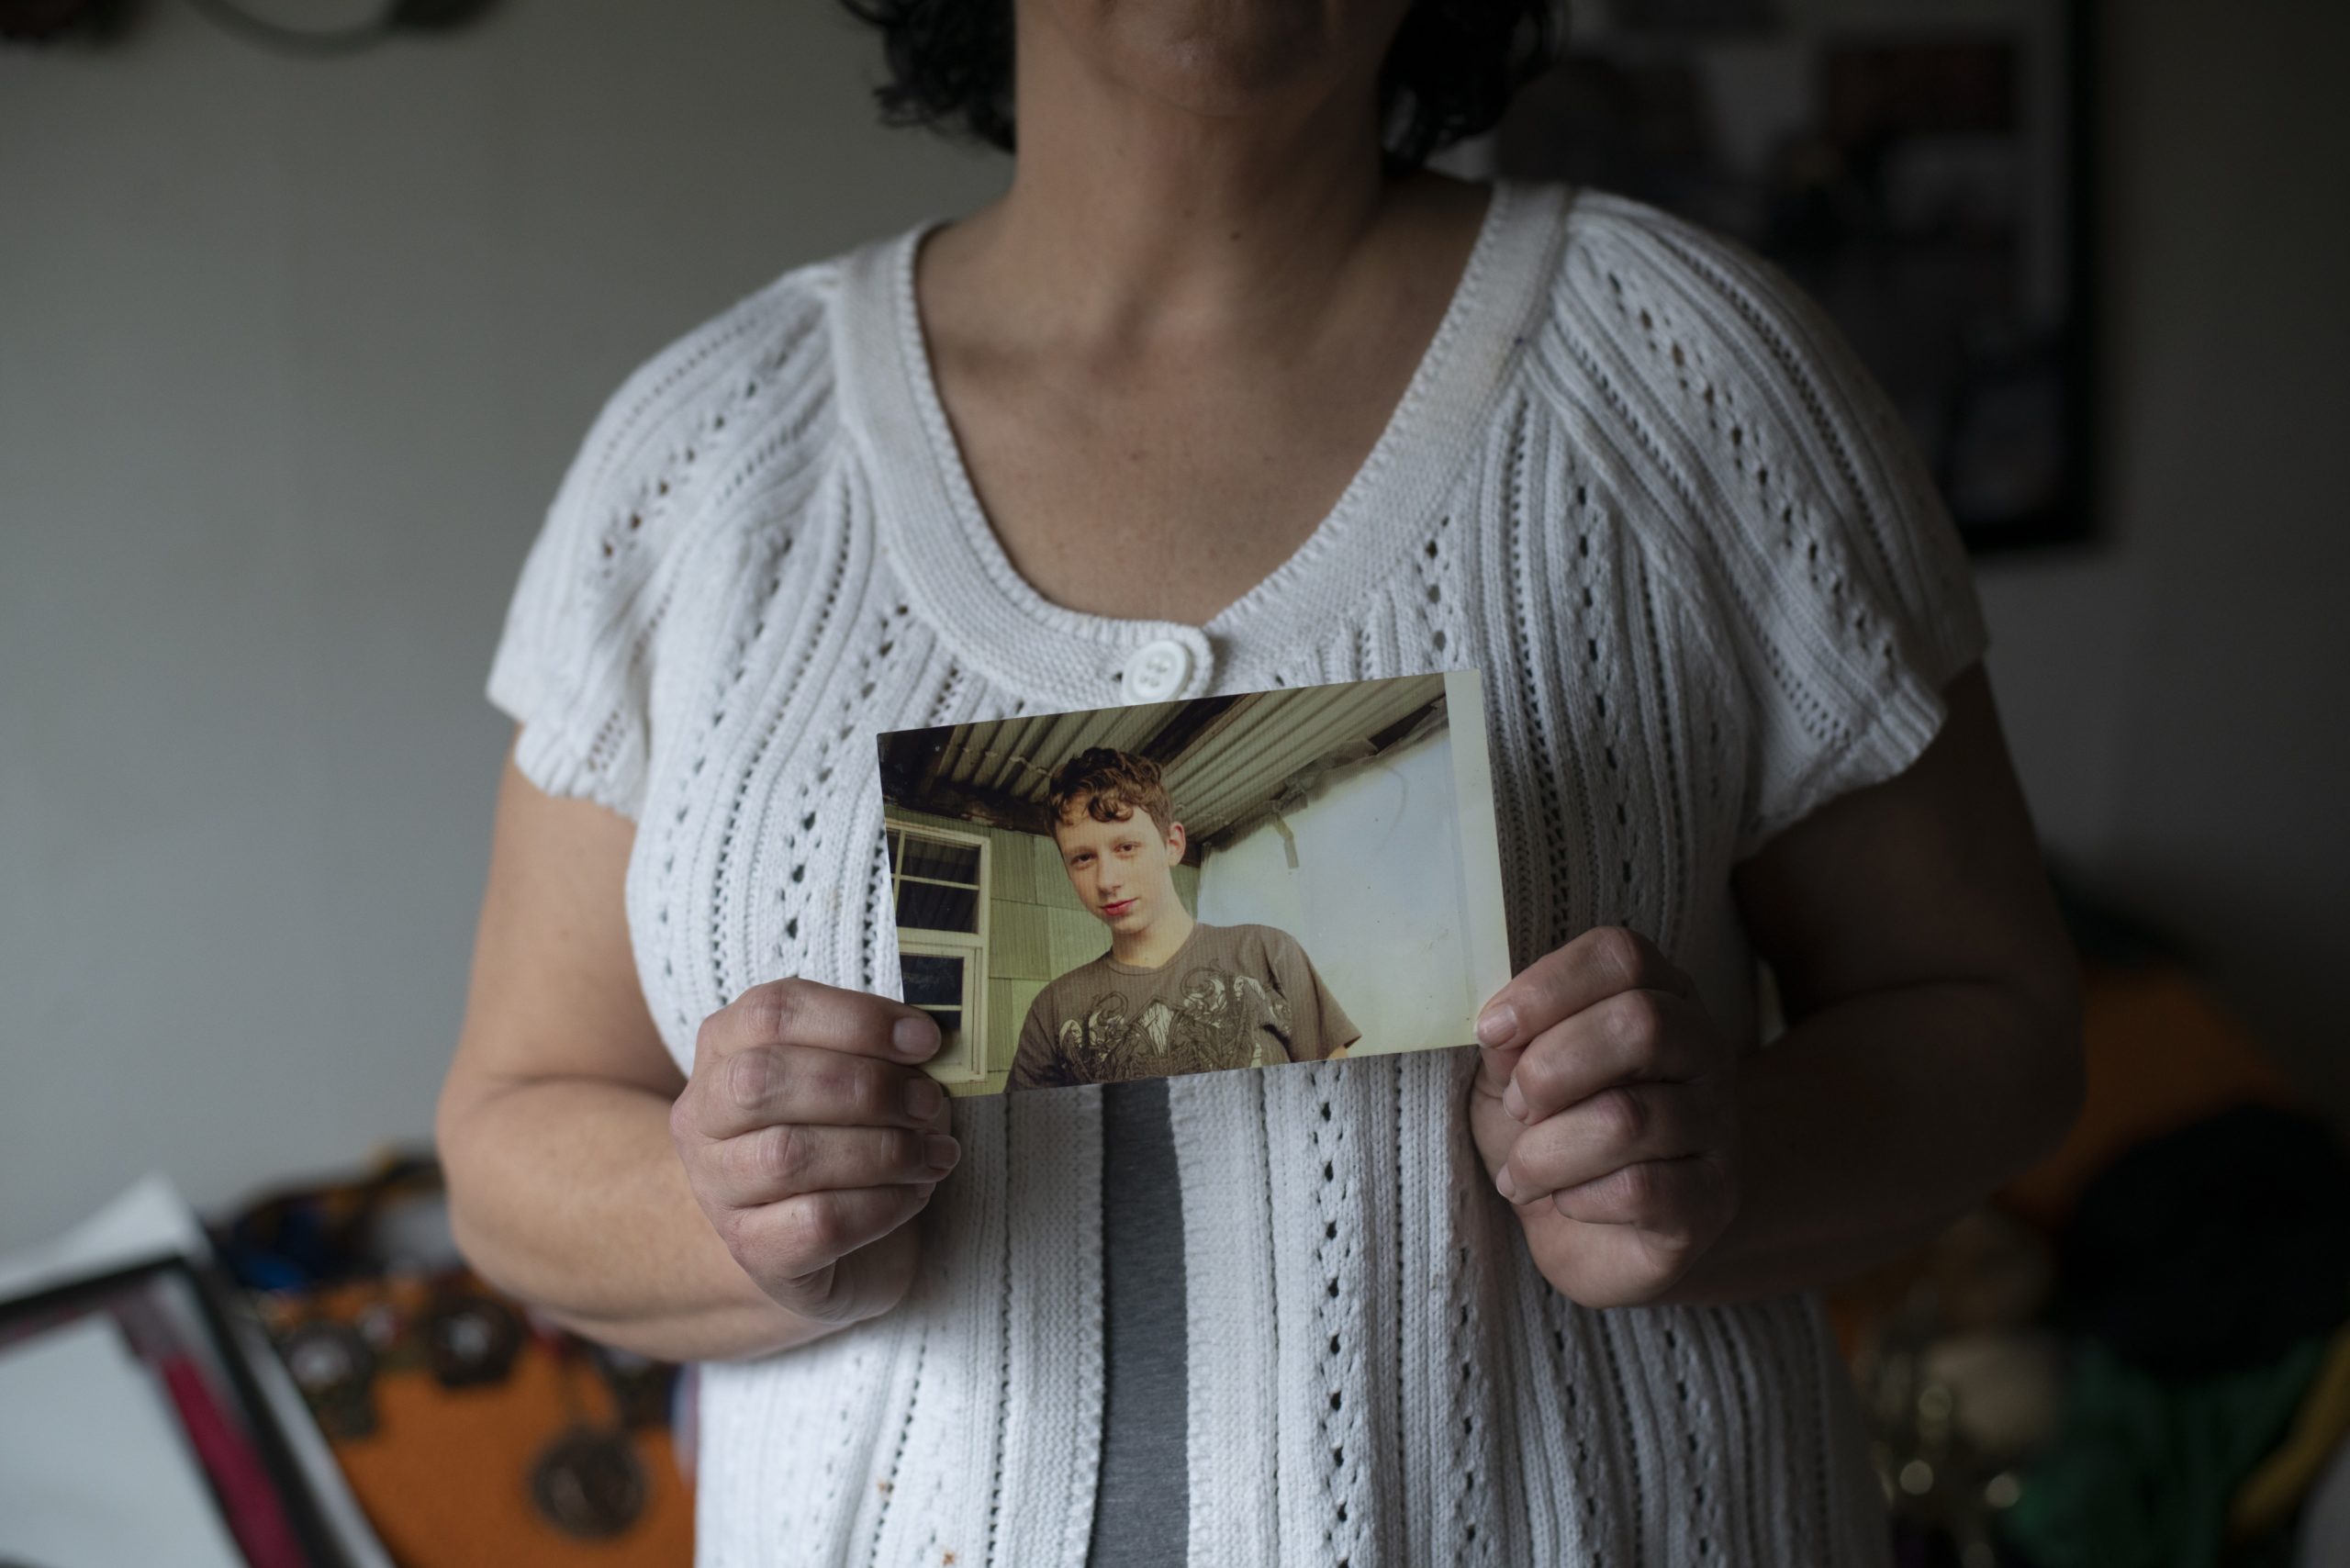 Laura Kealiher holds a snapshot of her son Sean Kealiher, a Portland activist killed in 2019 when he was 23, at her home in Portland, Oregon, on January 30, 2021. Brooke Herbert for The Intercept